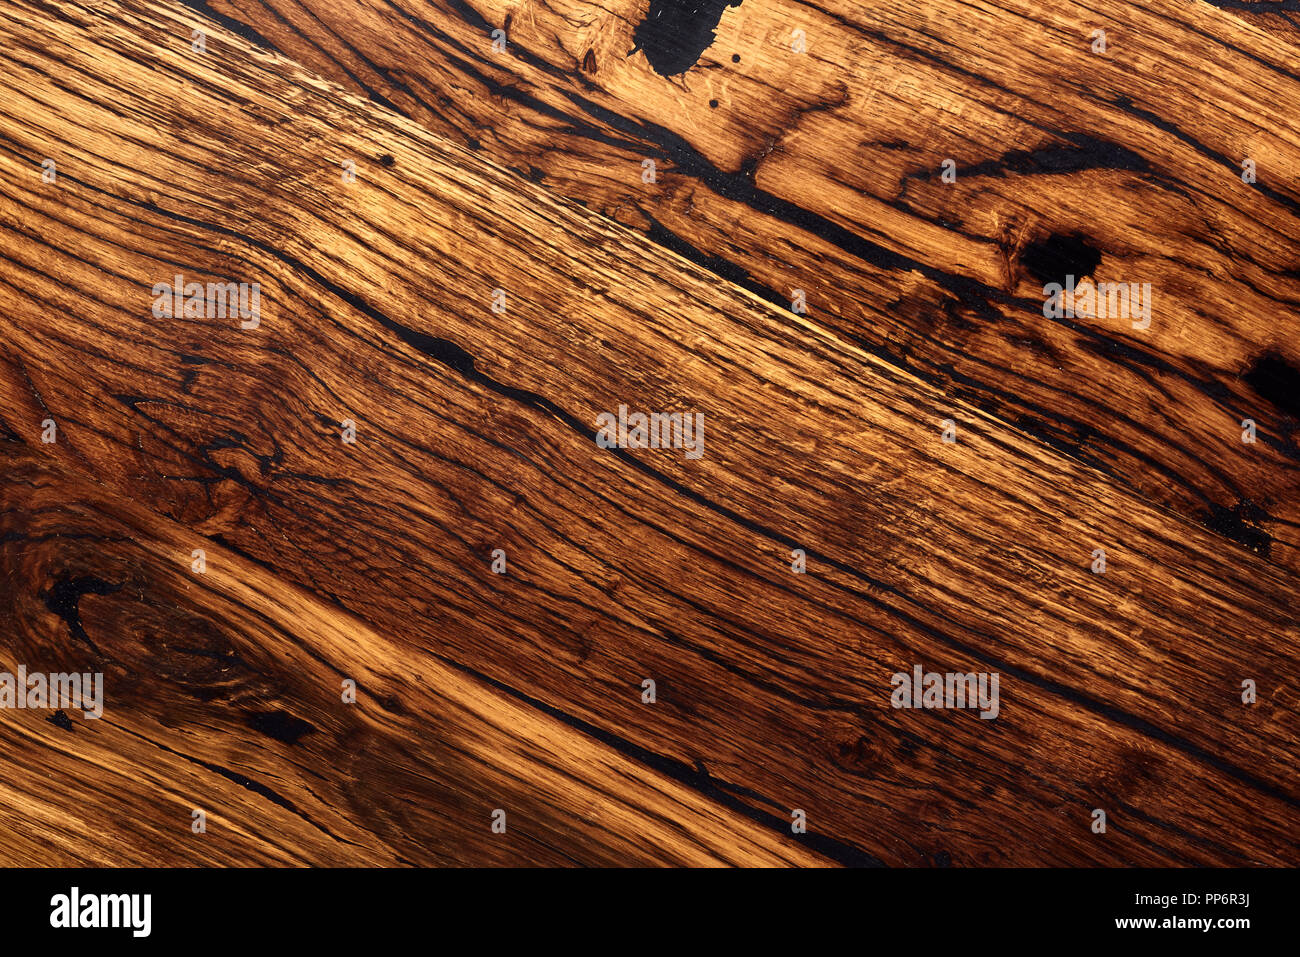 Oak wood table. Authentic board. Top view. Stock Photo